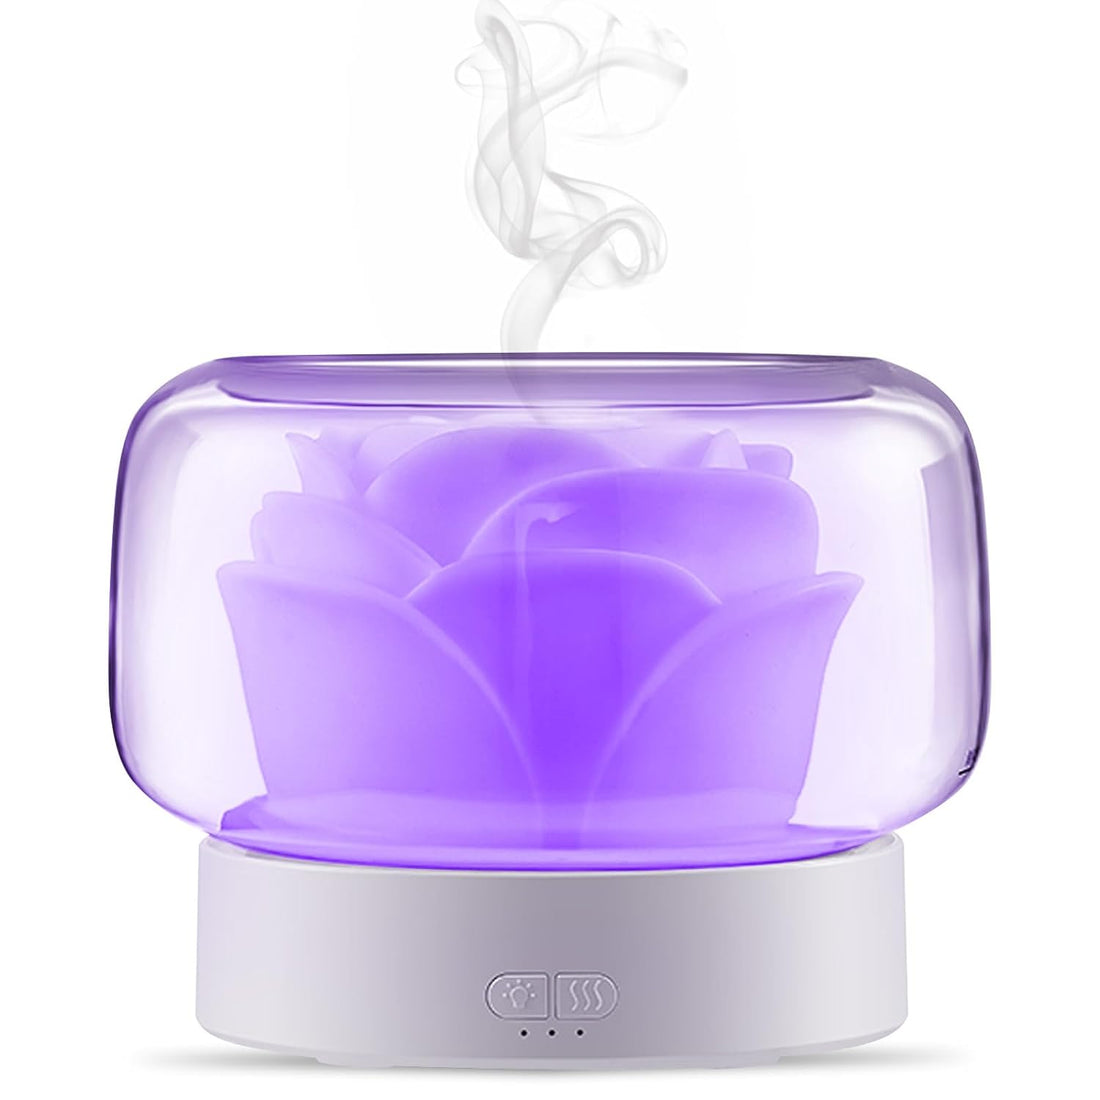 Essential Oil Diffusers 400ml Aromatherapy Diffuser Humidifier with 7 Colors Lights Auto-Off Humidifier Large Room Gift for Bedroom Office Yoga (White)